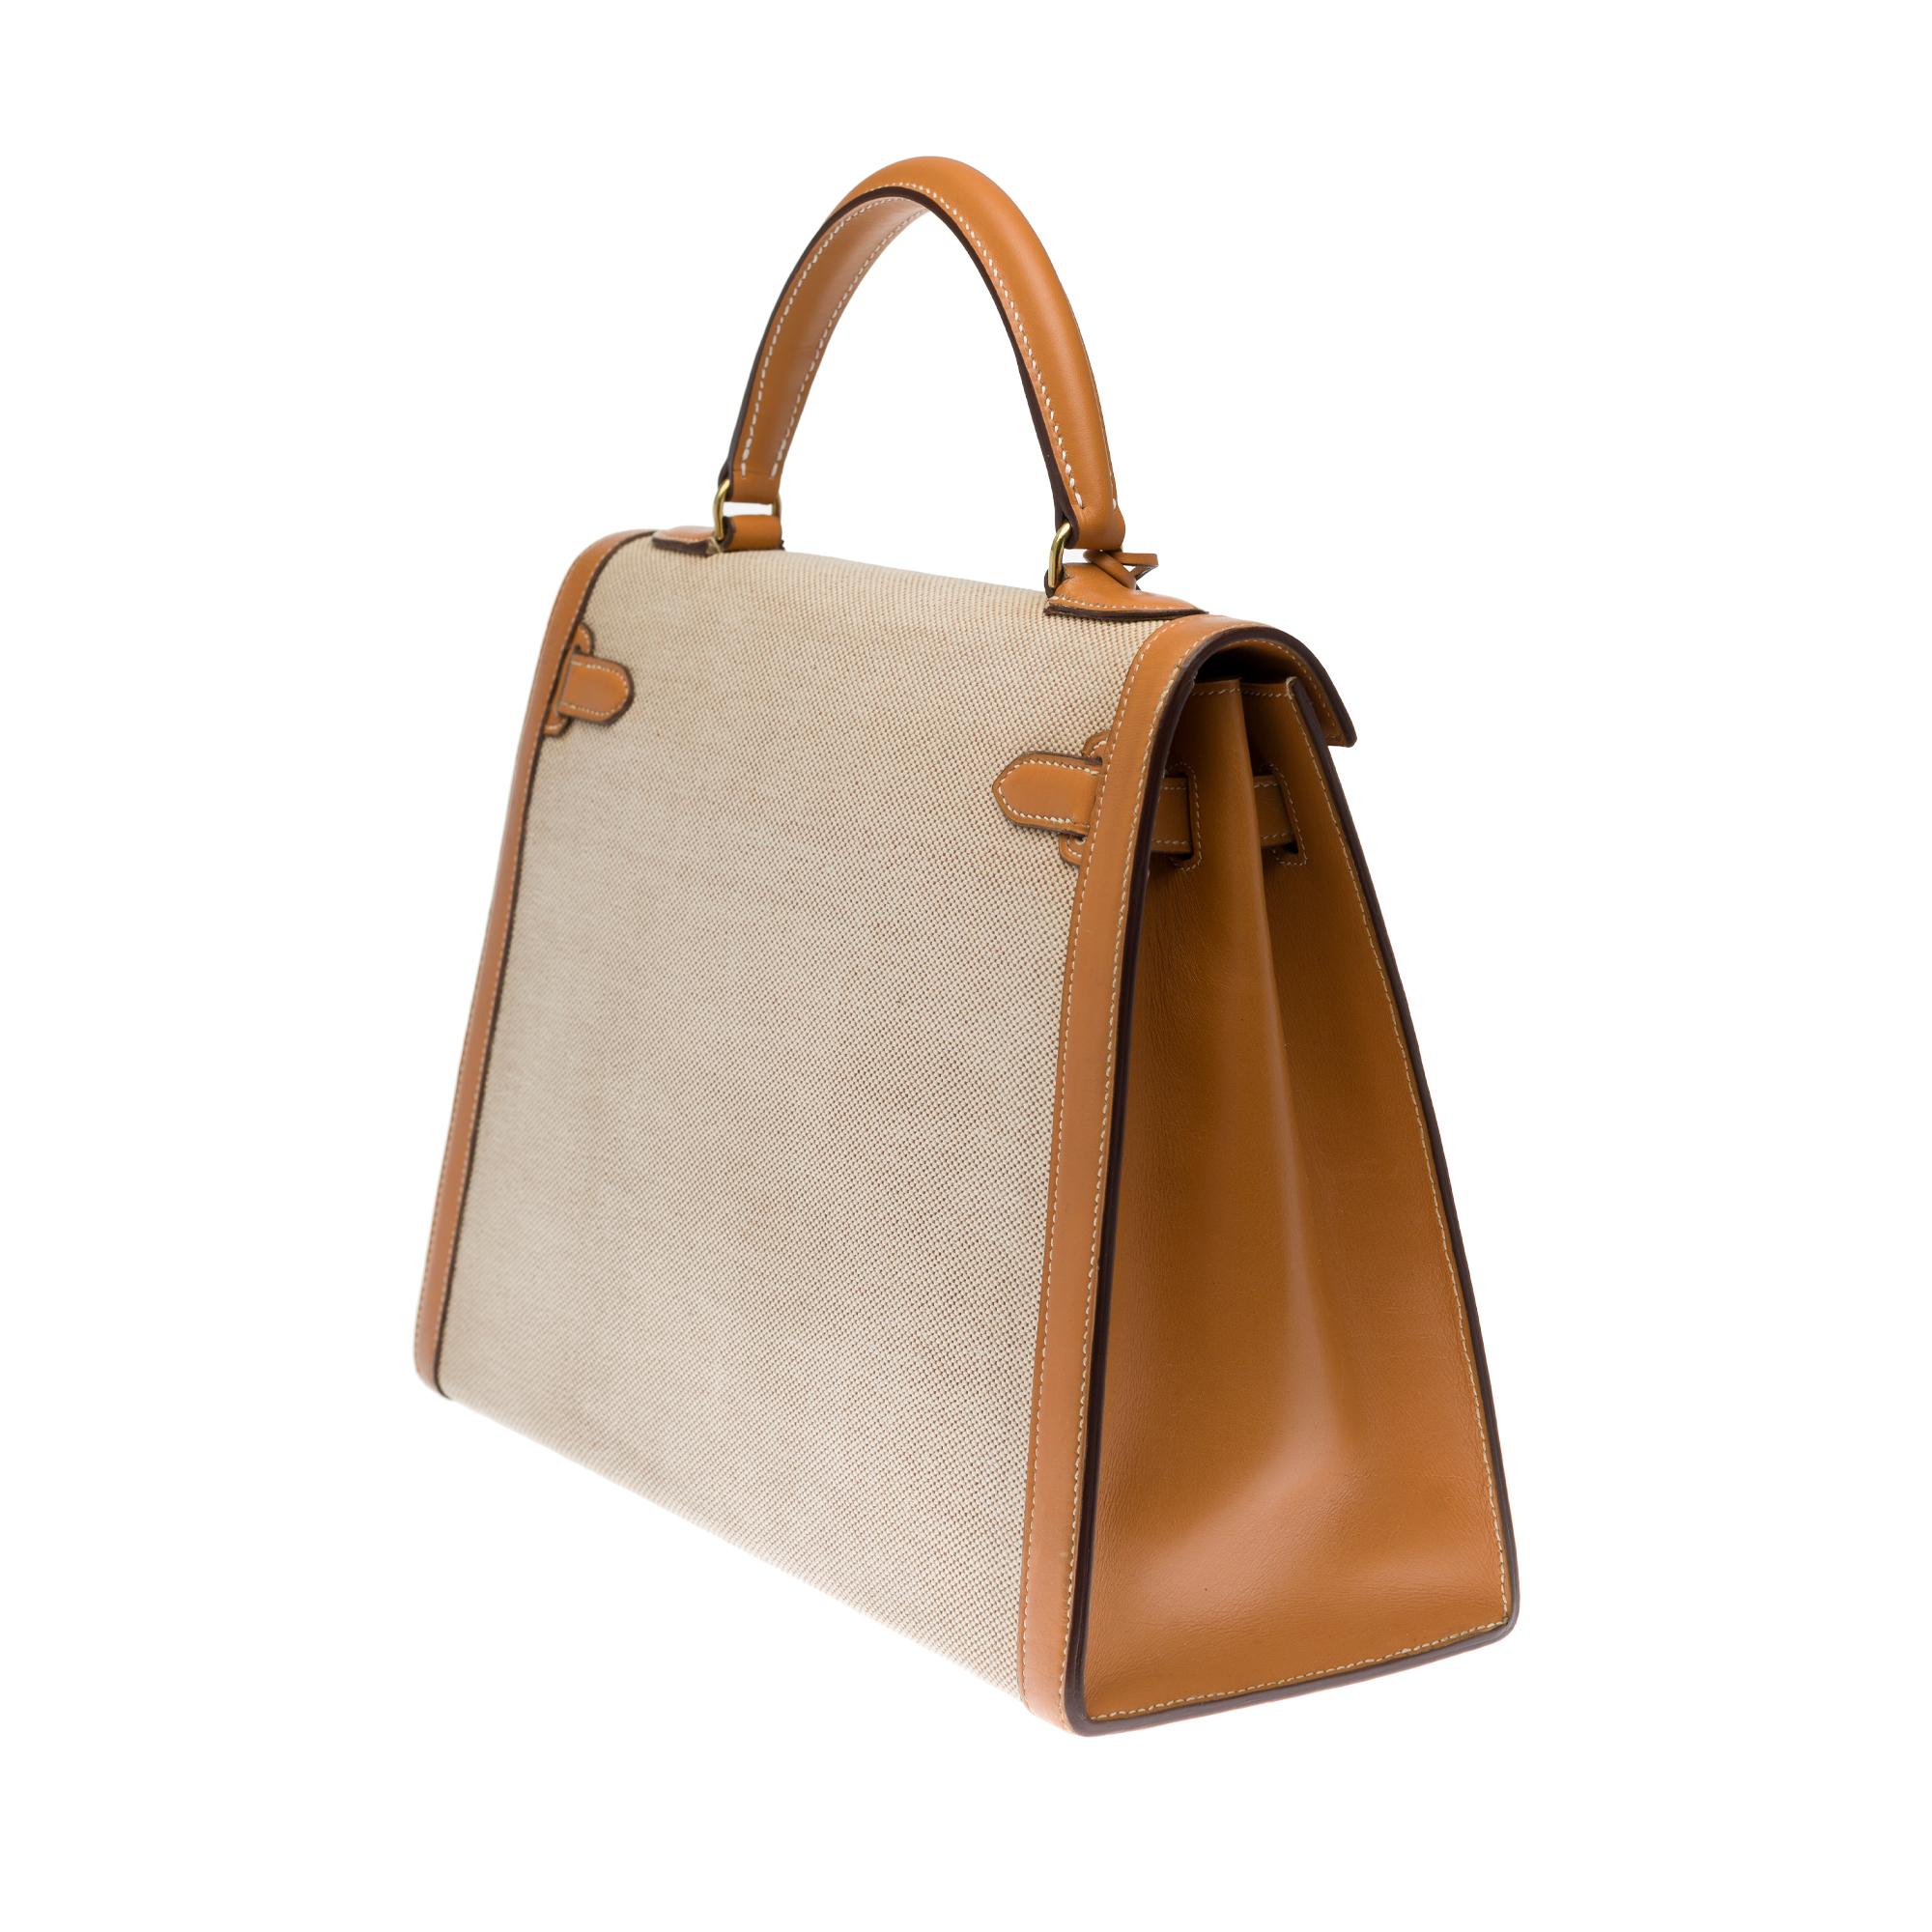 Beige Rare Hermès Kelly 32 sellier handbag with strap in beige leather and canvas, GHW